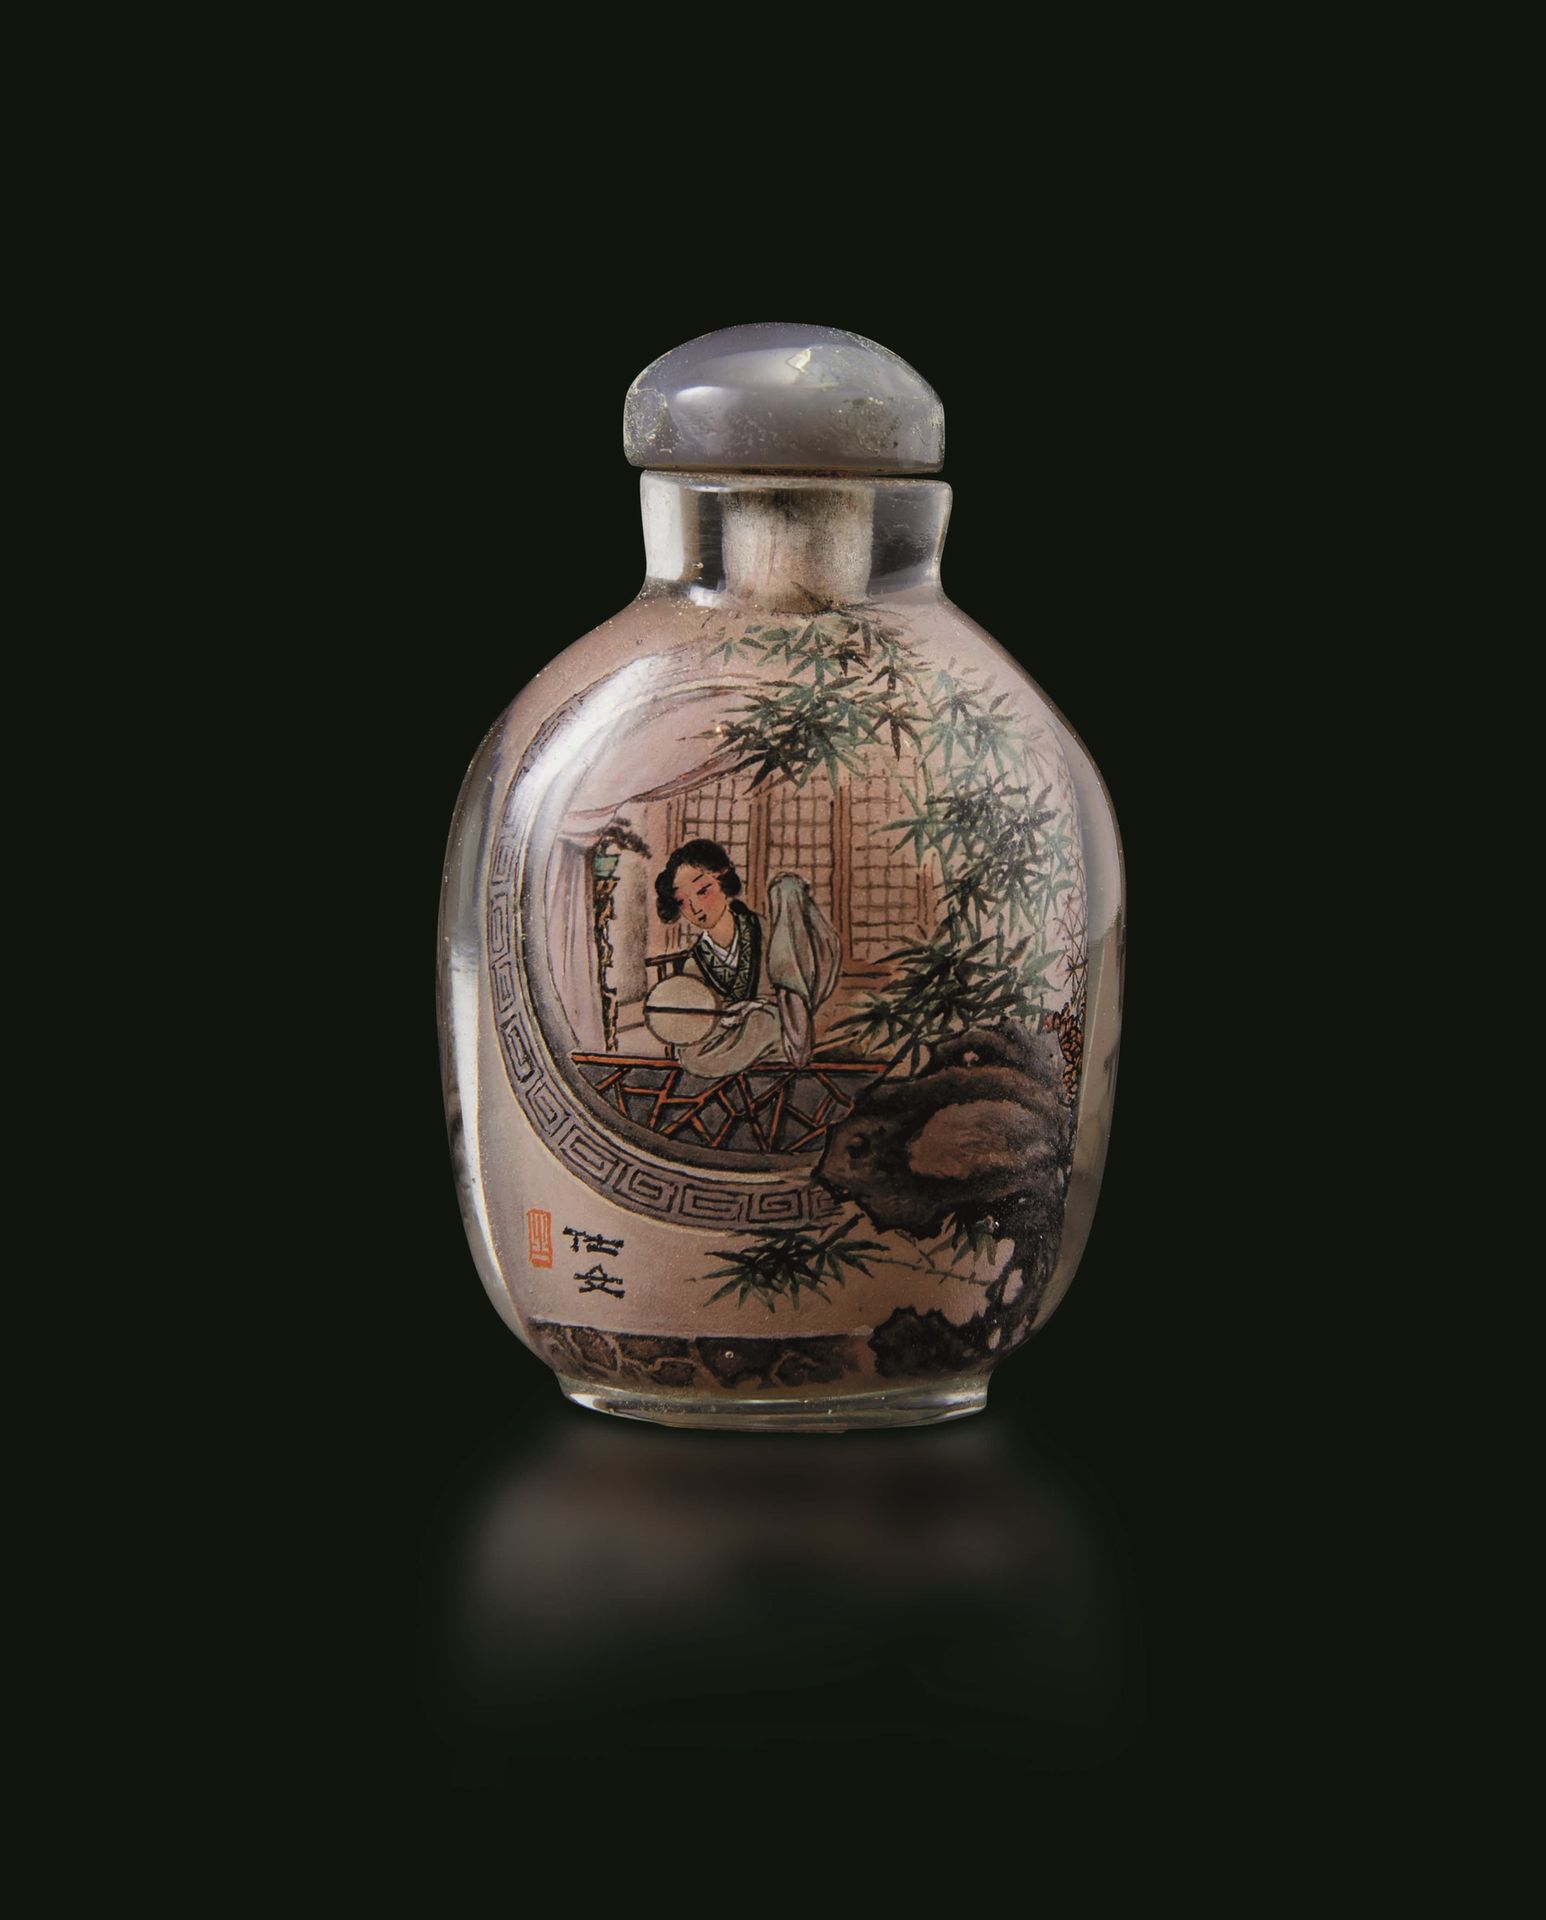 A glass snuff bottle, China, 1900s H 7cm